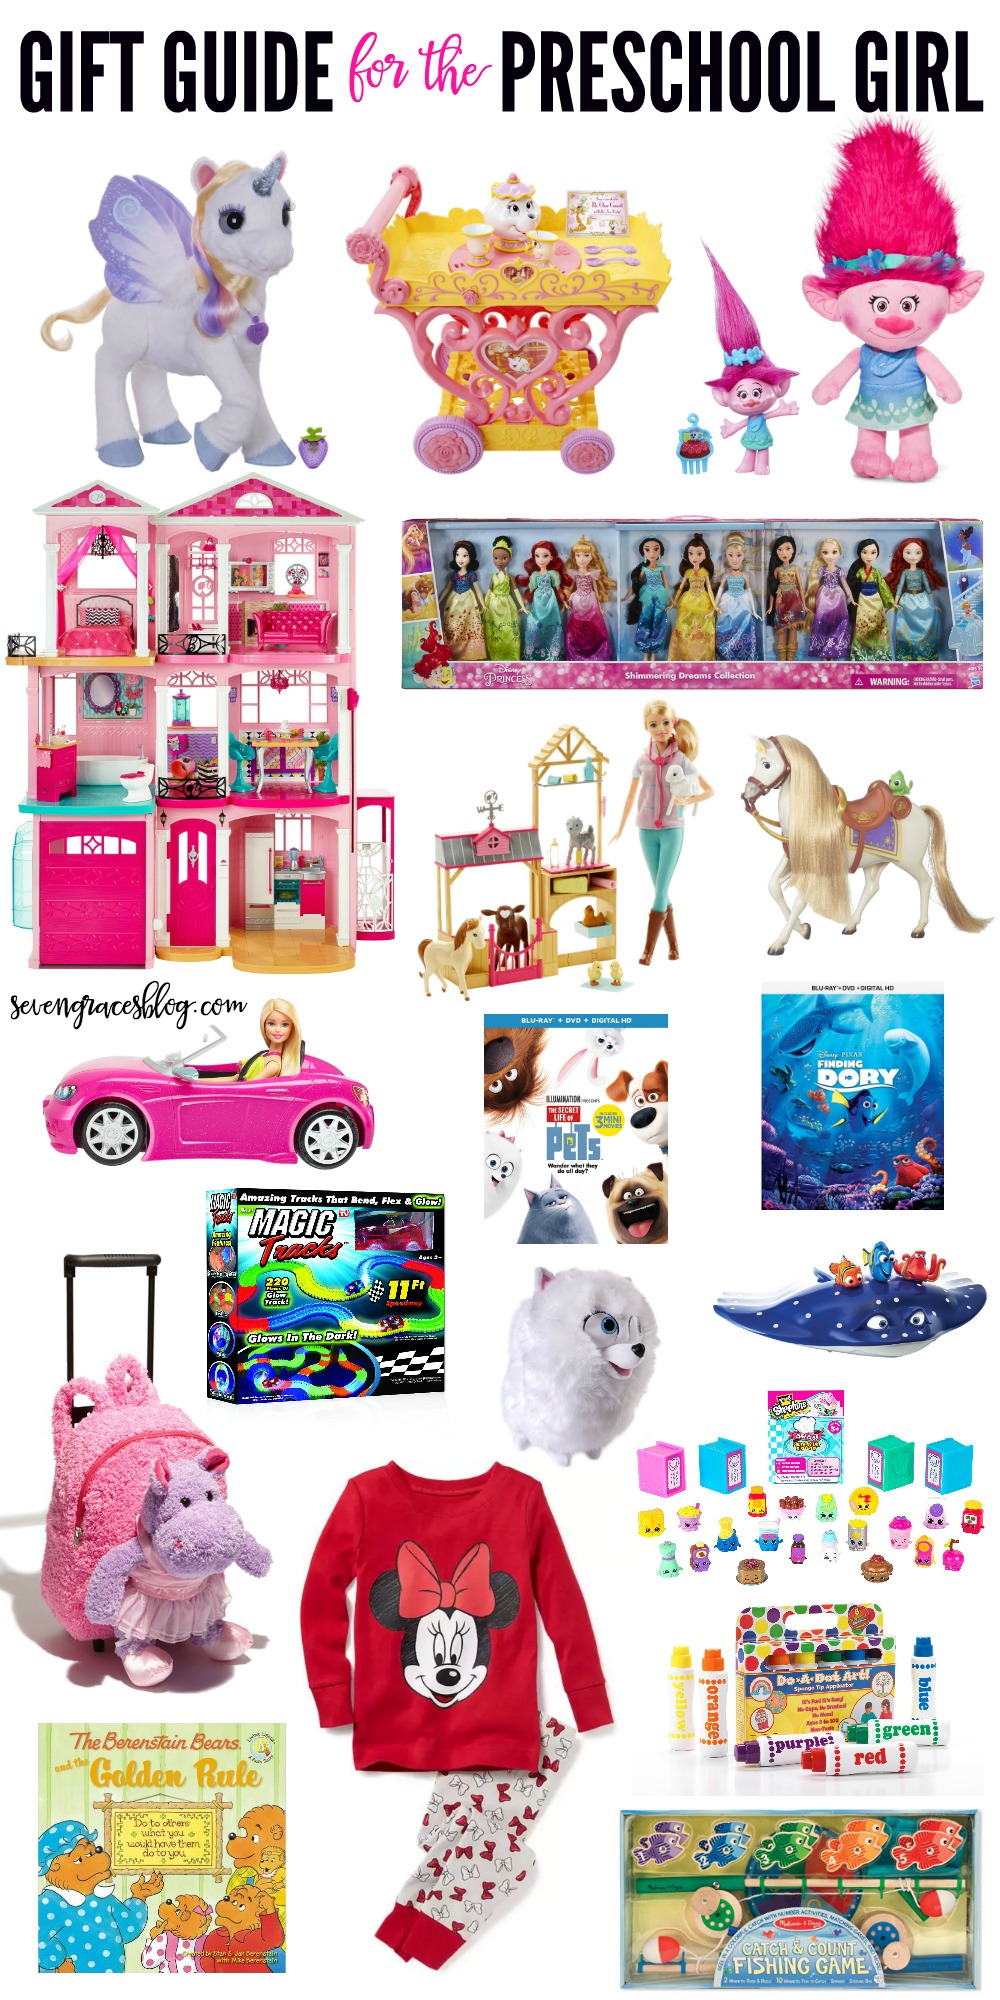 The ultimate gift guide for the preschool girl. All the best gifts for the little girl who loves all things fun. Barbies, wheels, animals, crafts, and movies, and more galore!